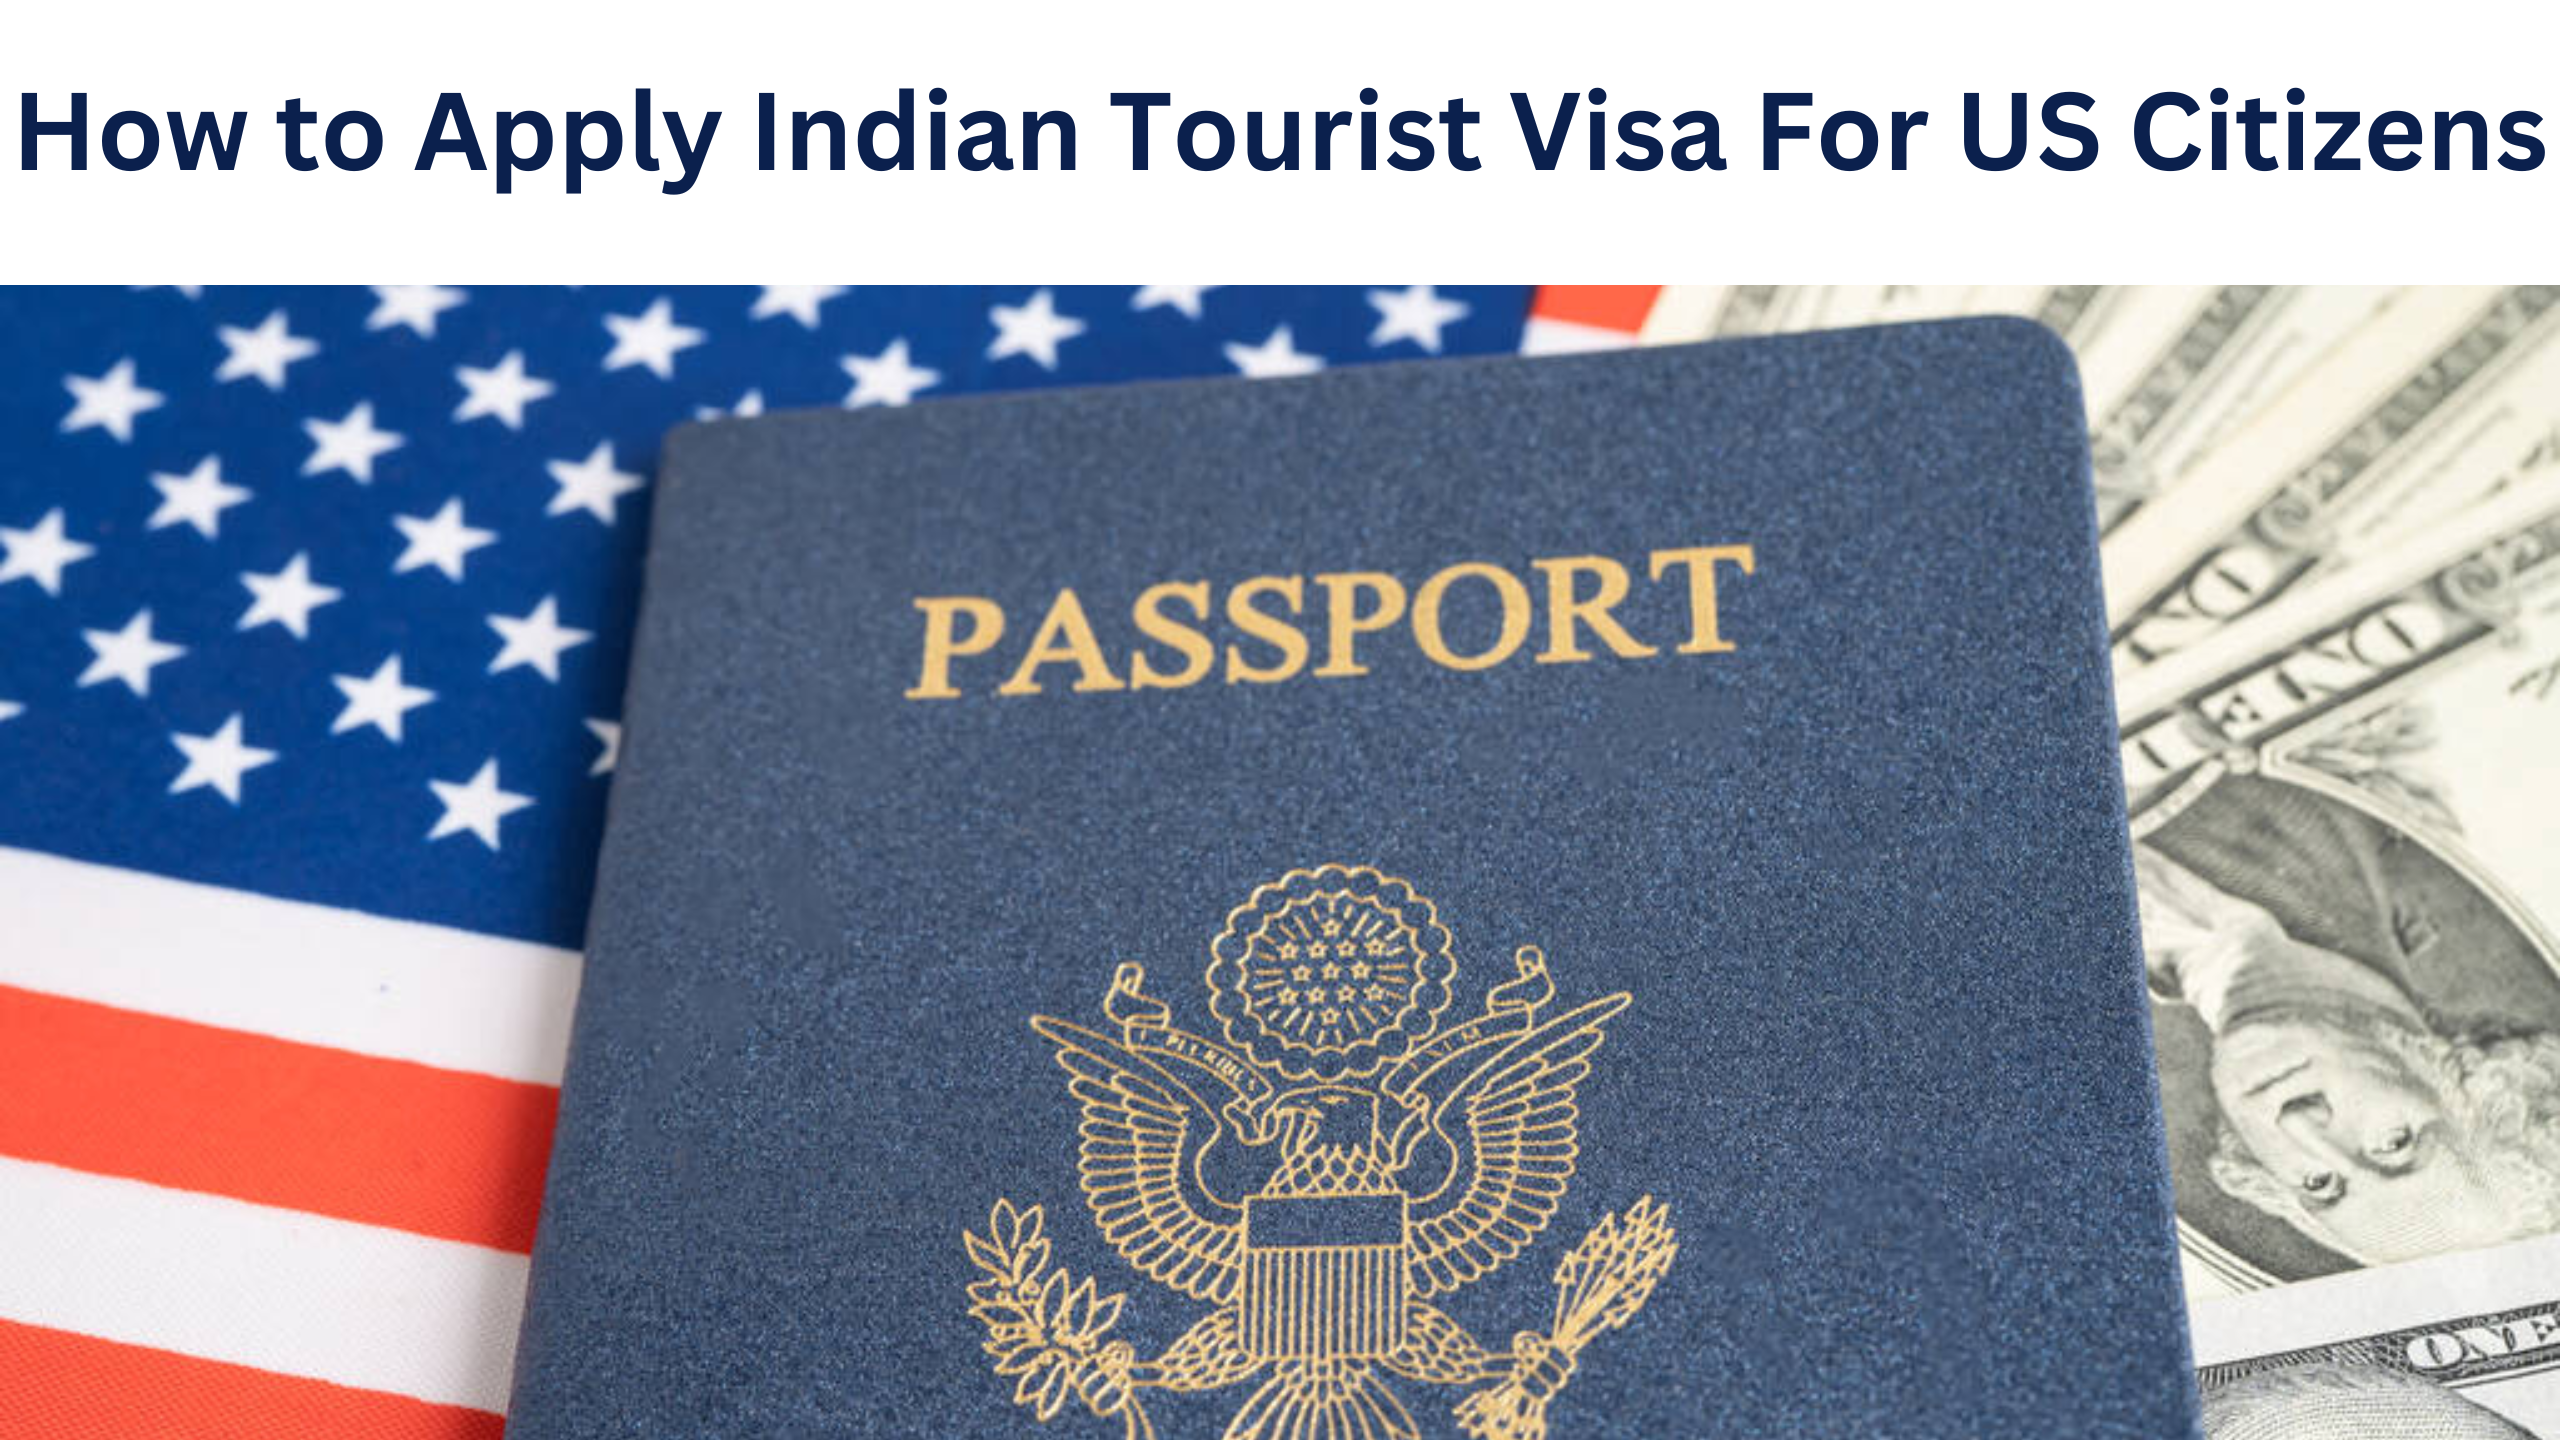 How to Apply Indian Tourist Visa For US Citizens